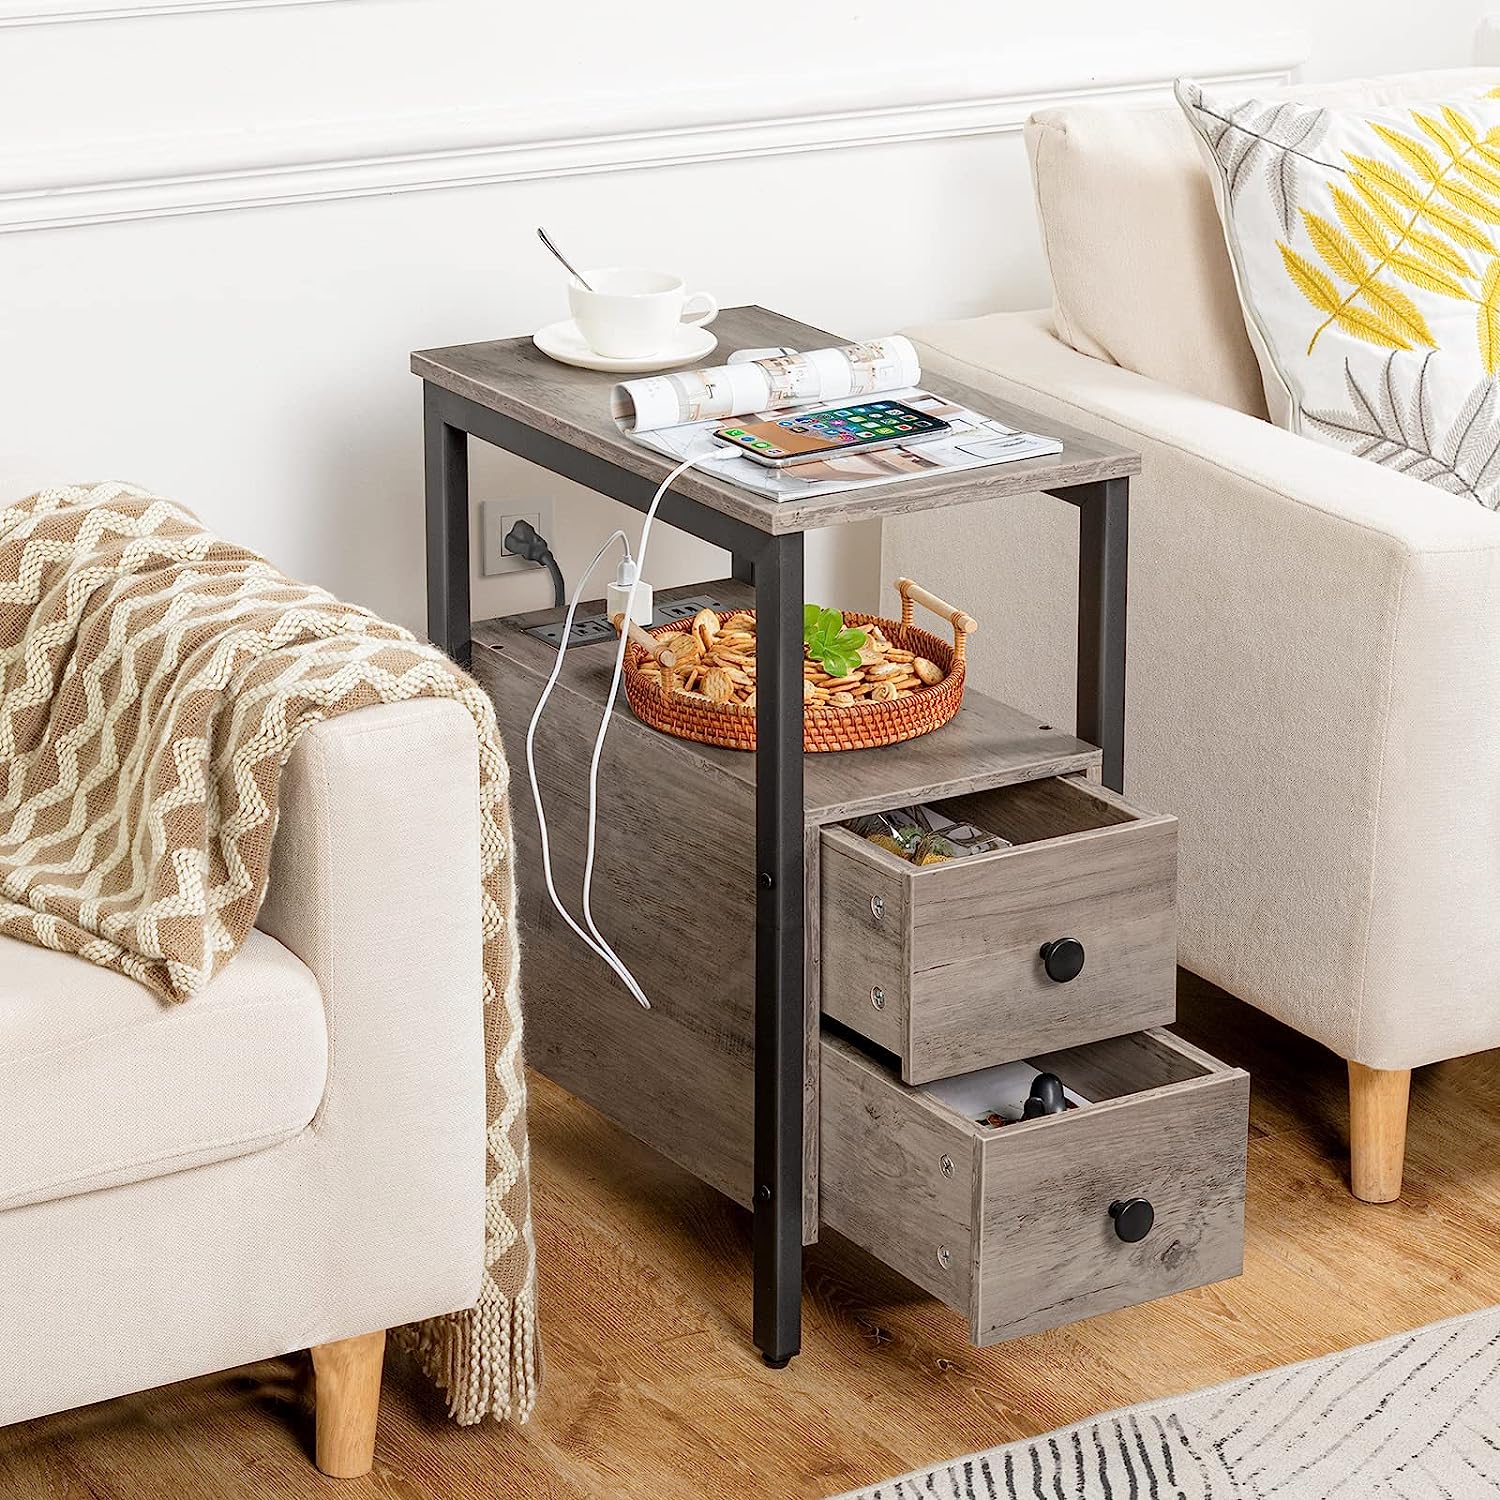 who would not benefit from a modern farmhouse multi-functional end table that comes with a built-in charging station with USD ports and power outlets.